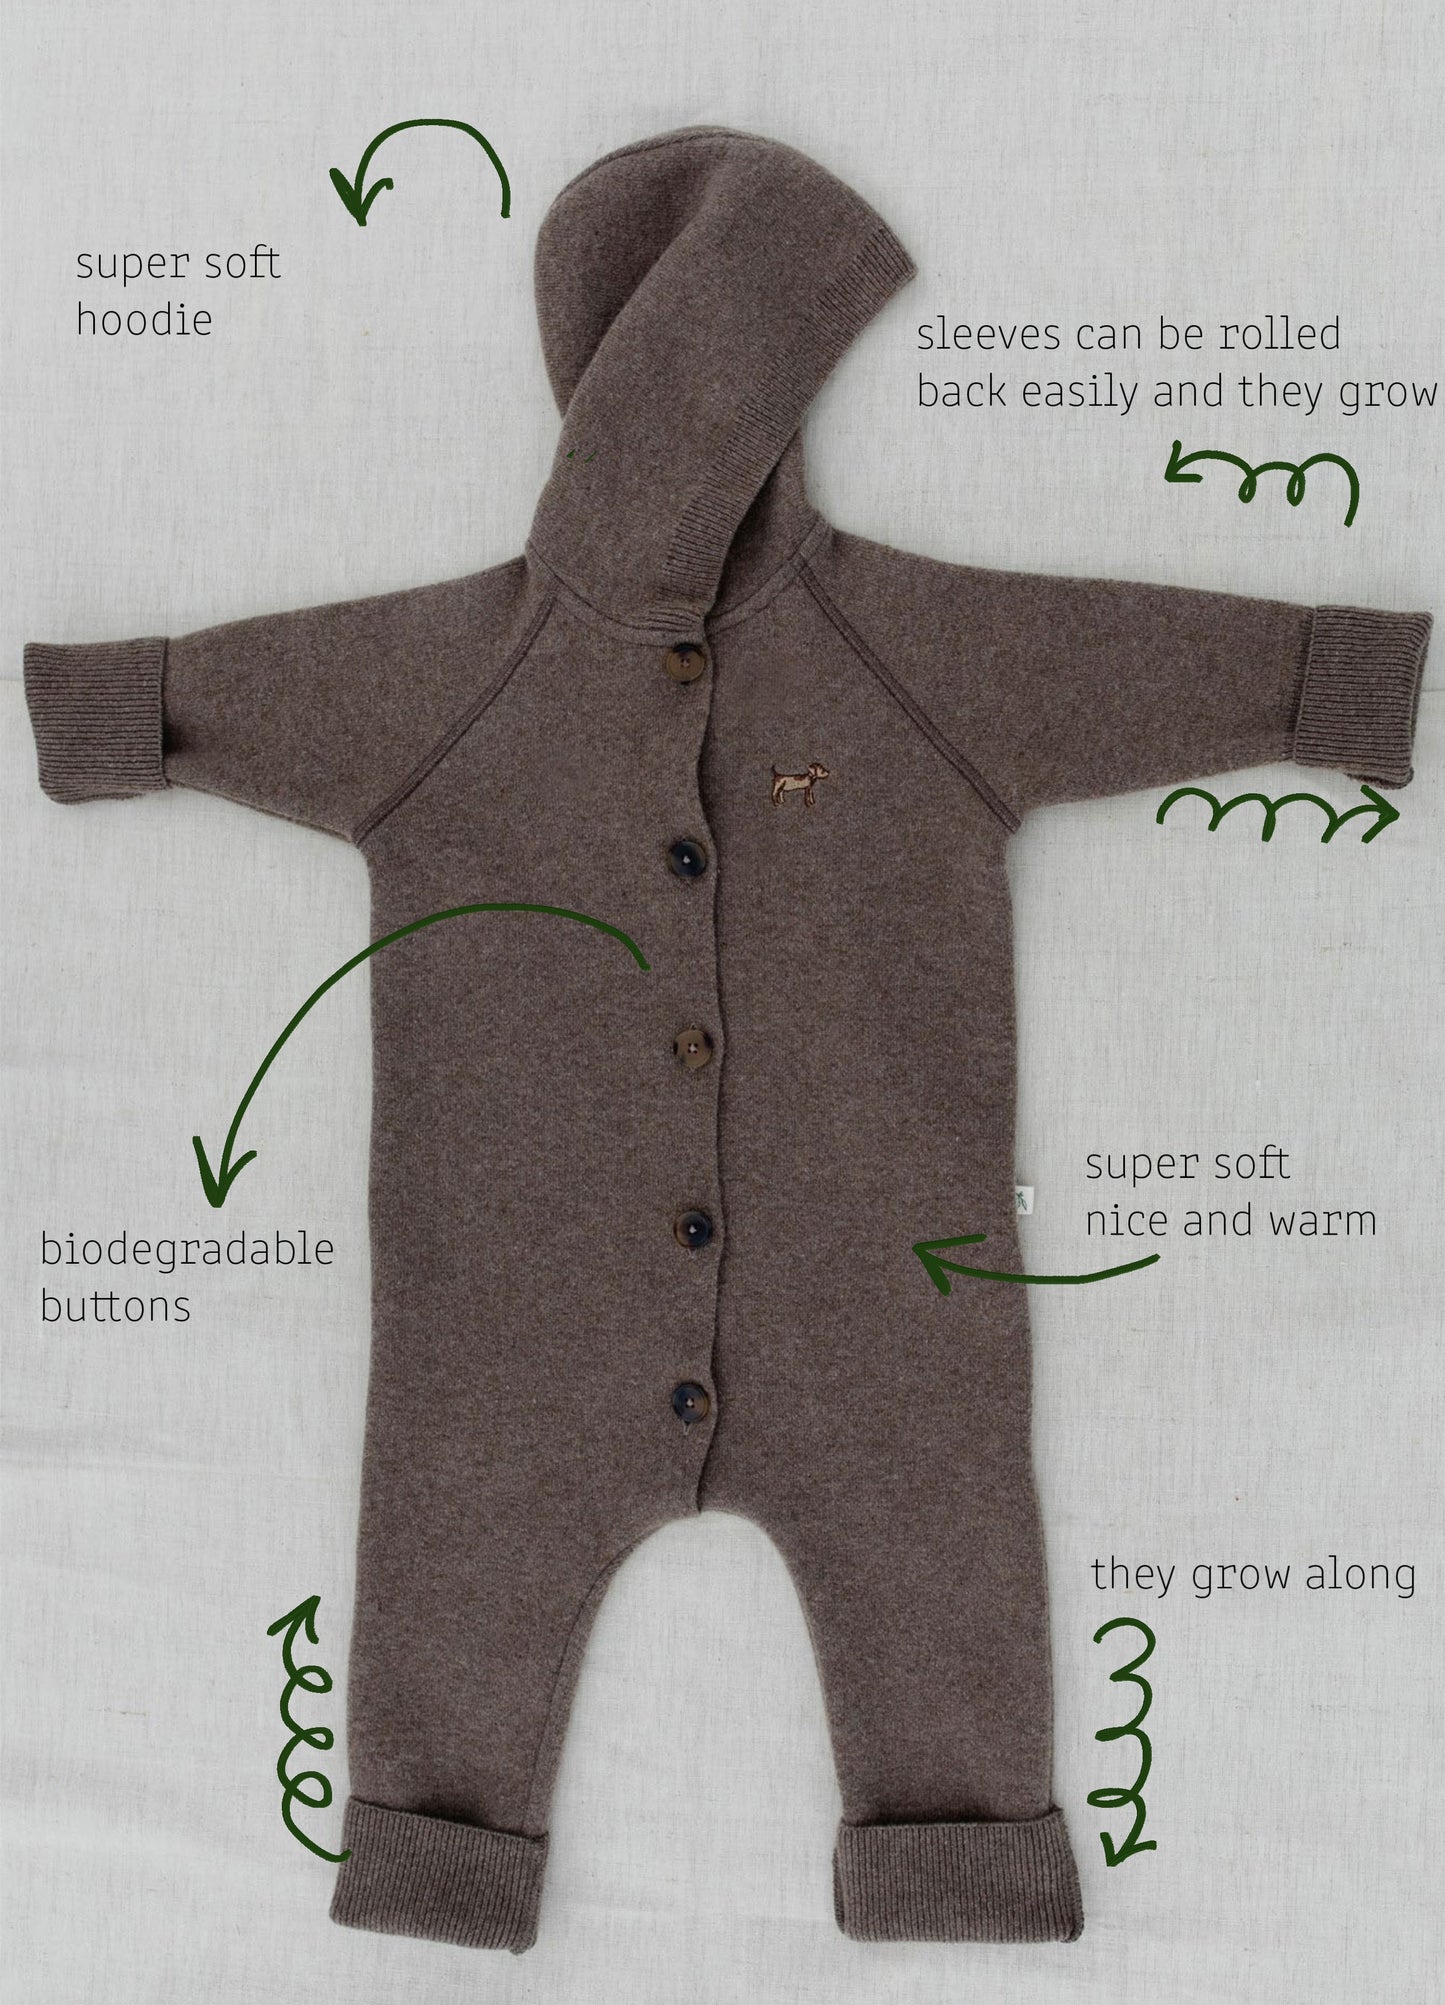 Merino Baby suit that can grow